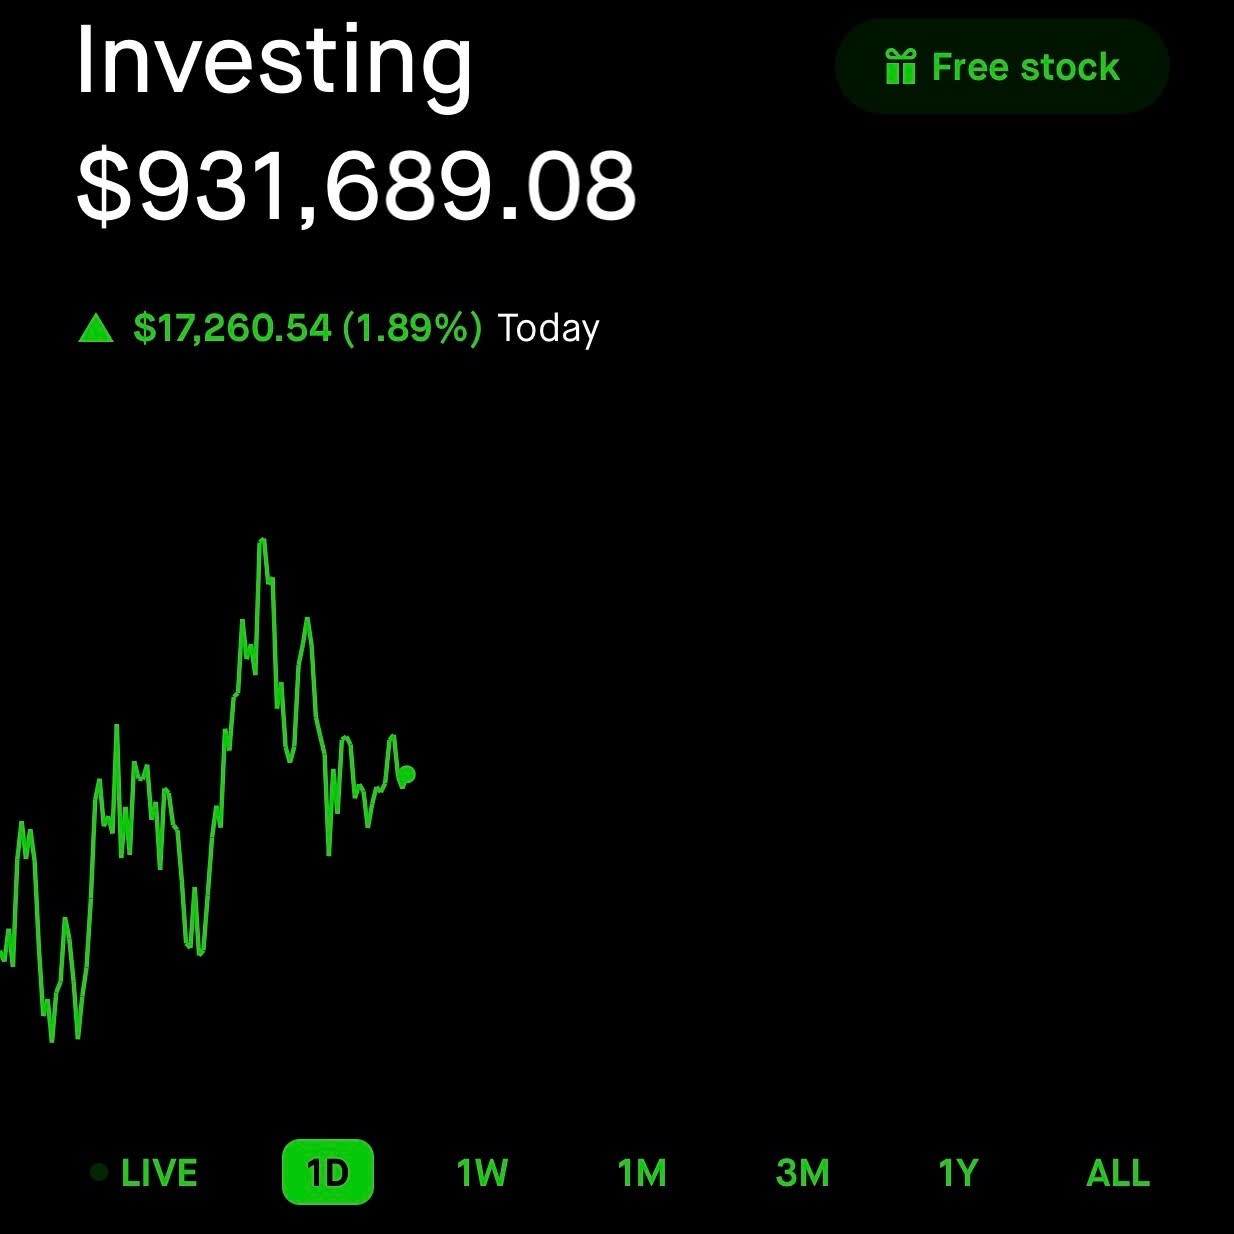 Glauber Contessoto's dogecoin holdings on Robinhood as of around 12:00 p.m. EST on Tuesday, July 6.